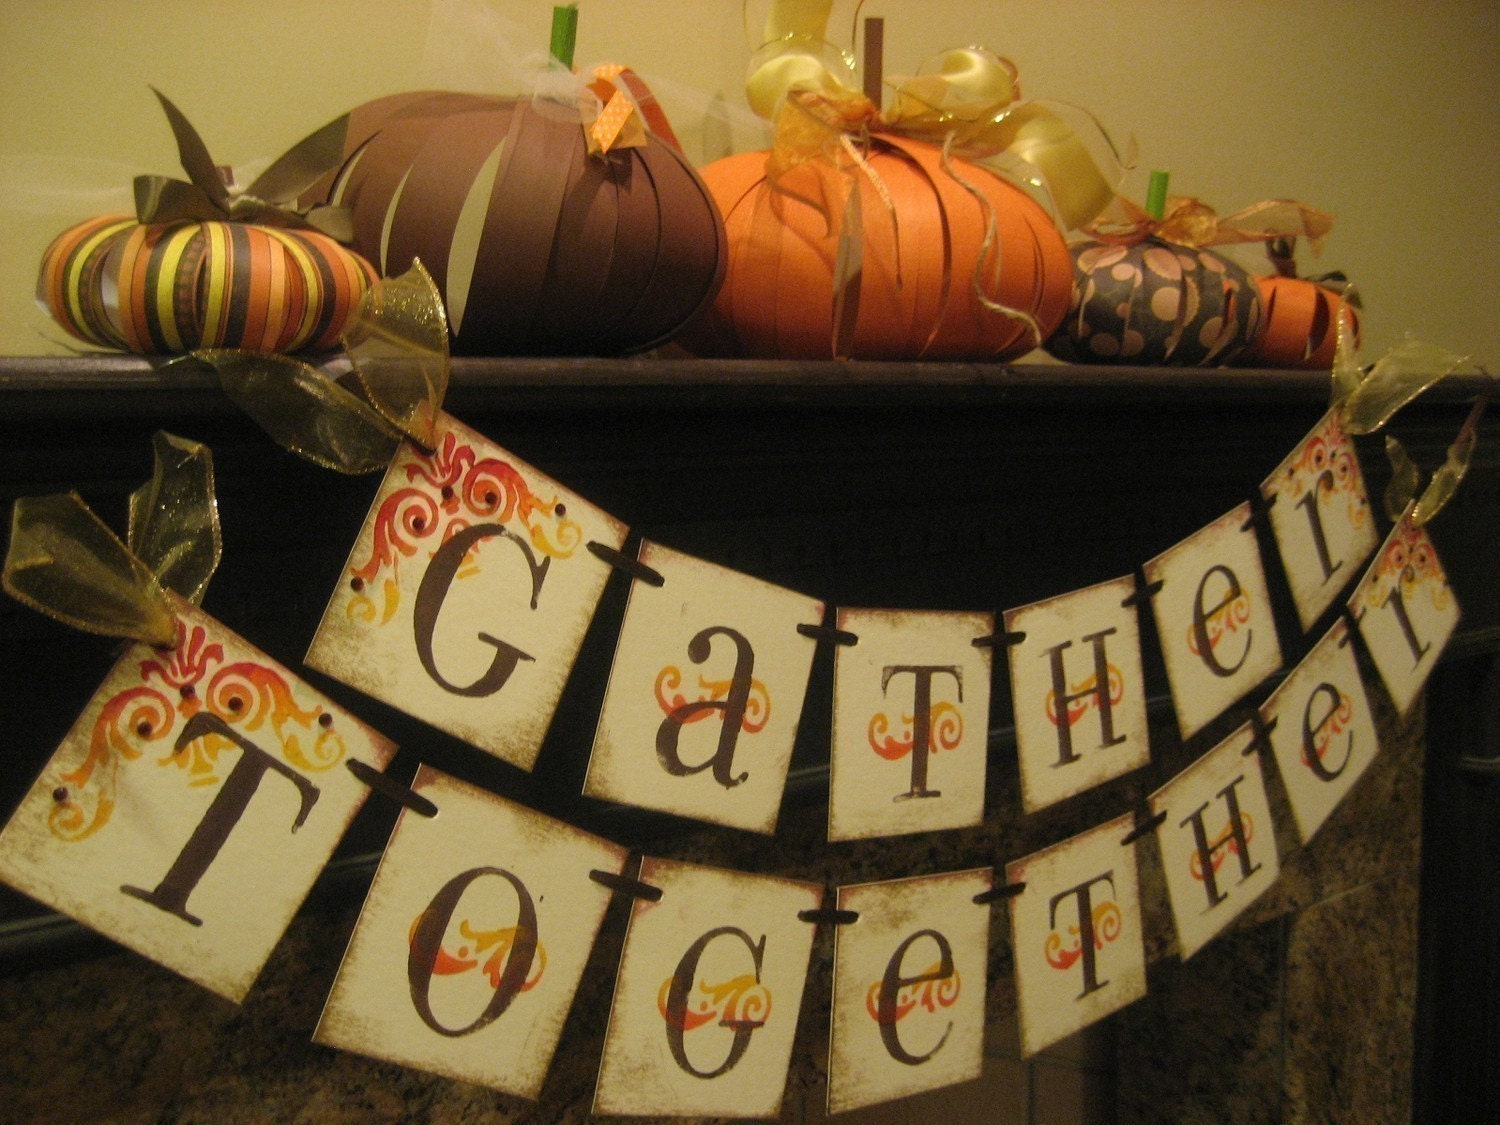 GATHER TOGETHER Autumn Banner